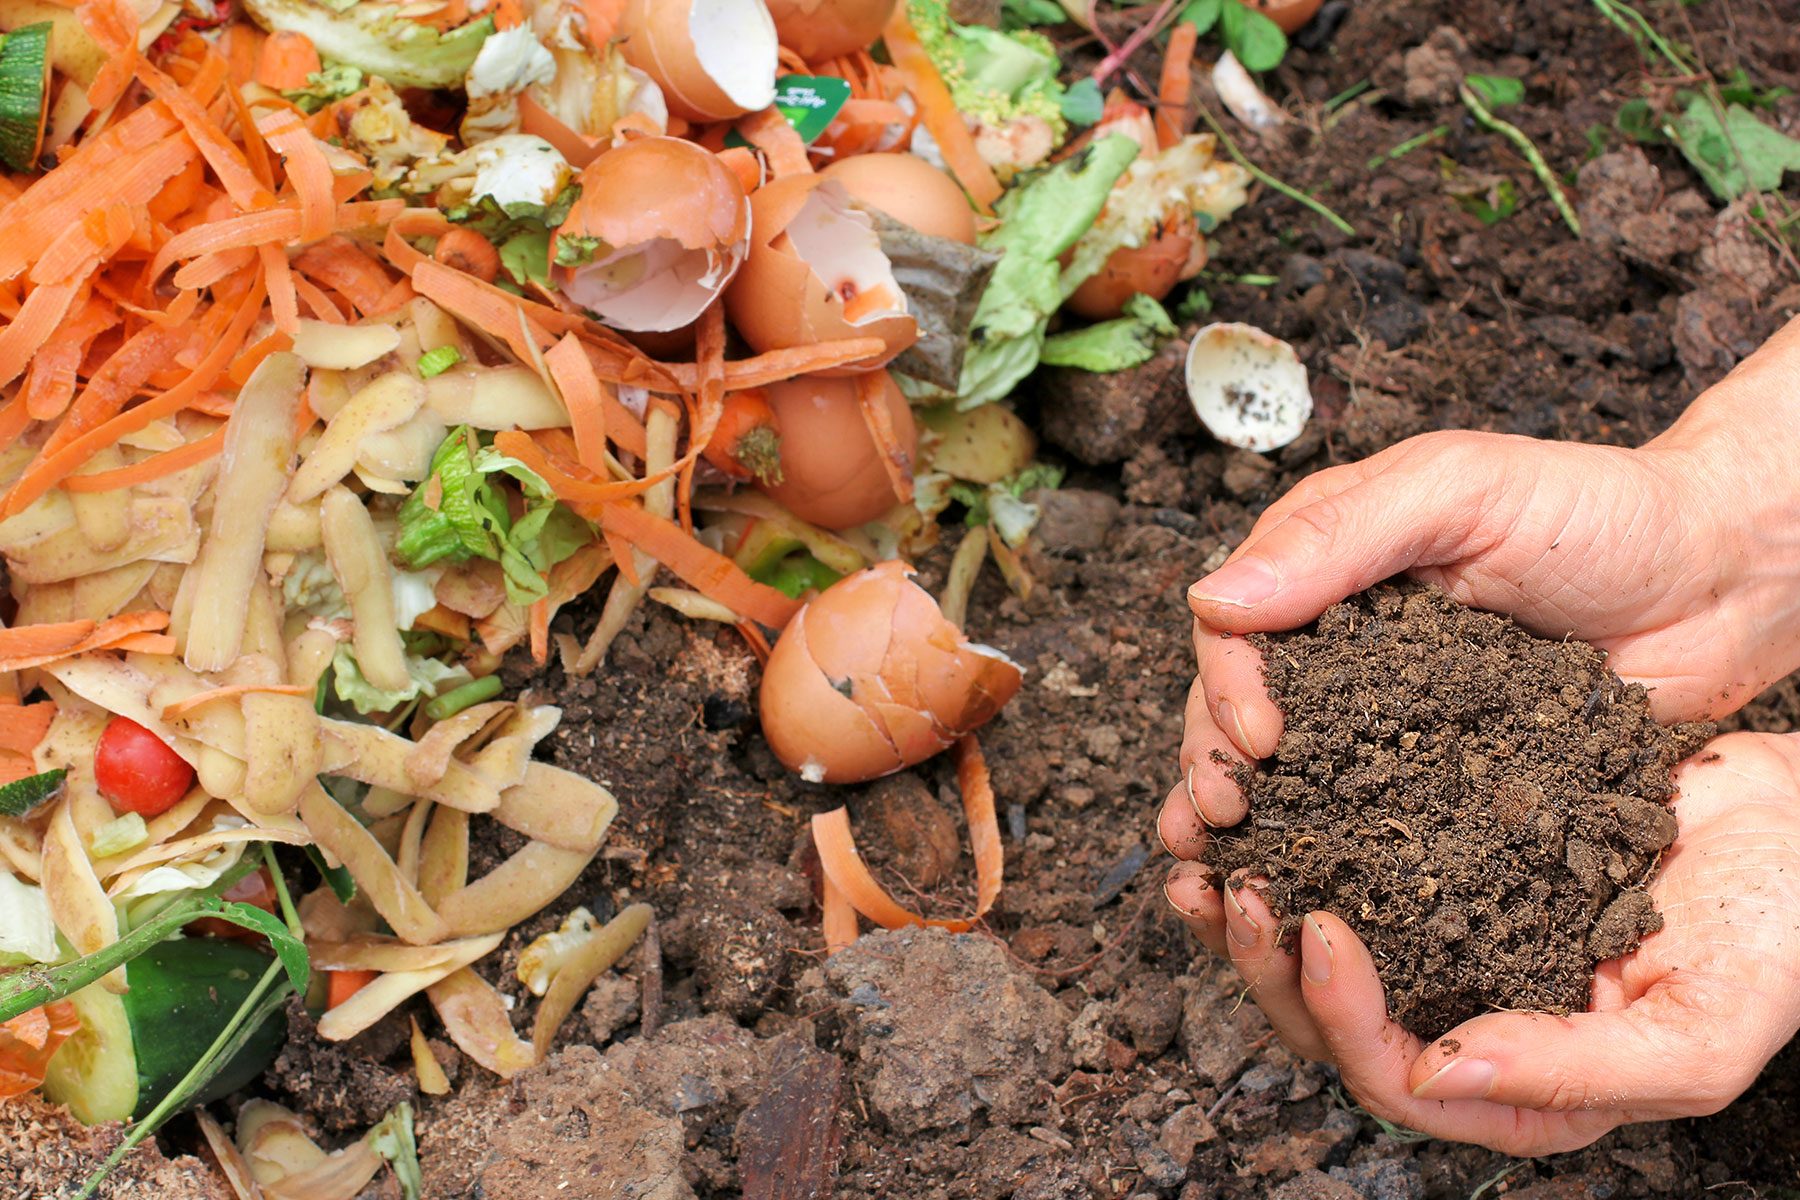 Hands Holding Compost Made with Soil and Food Scrap Waste